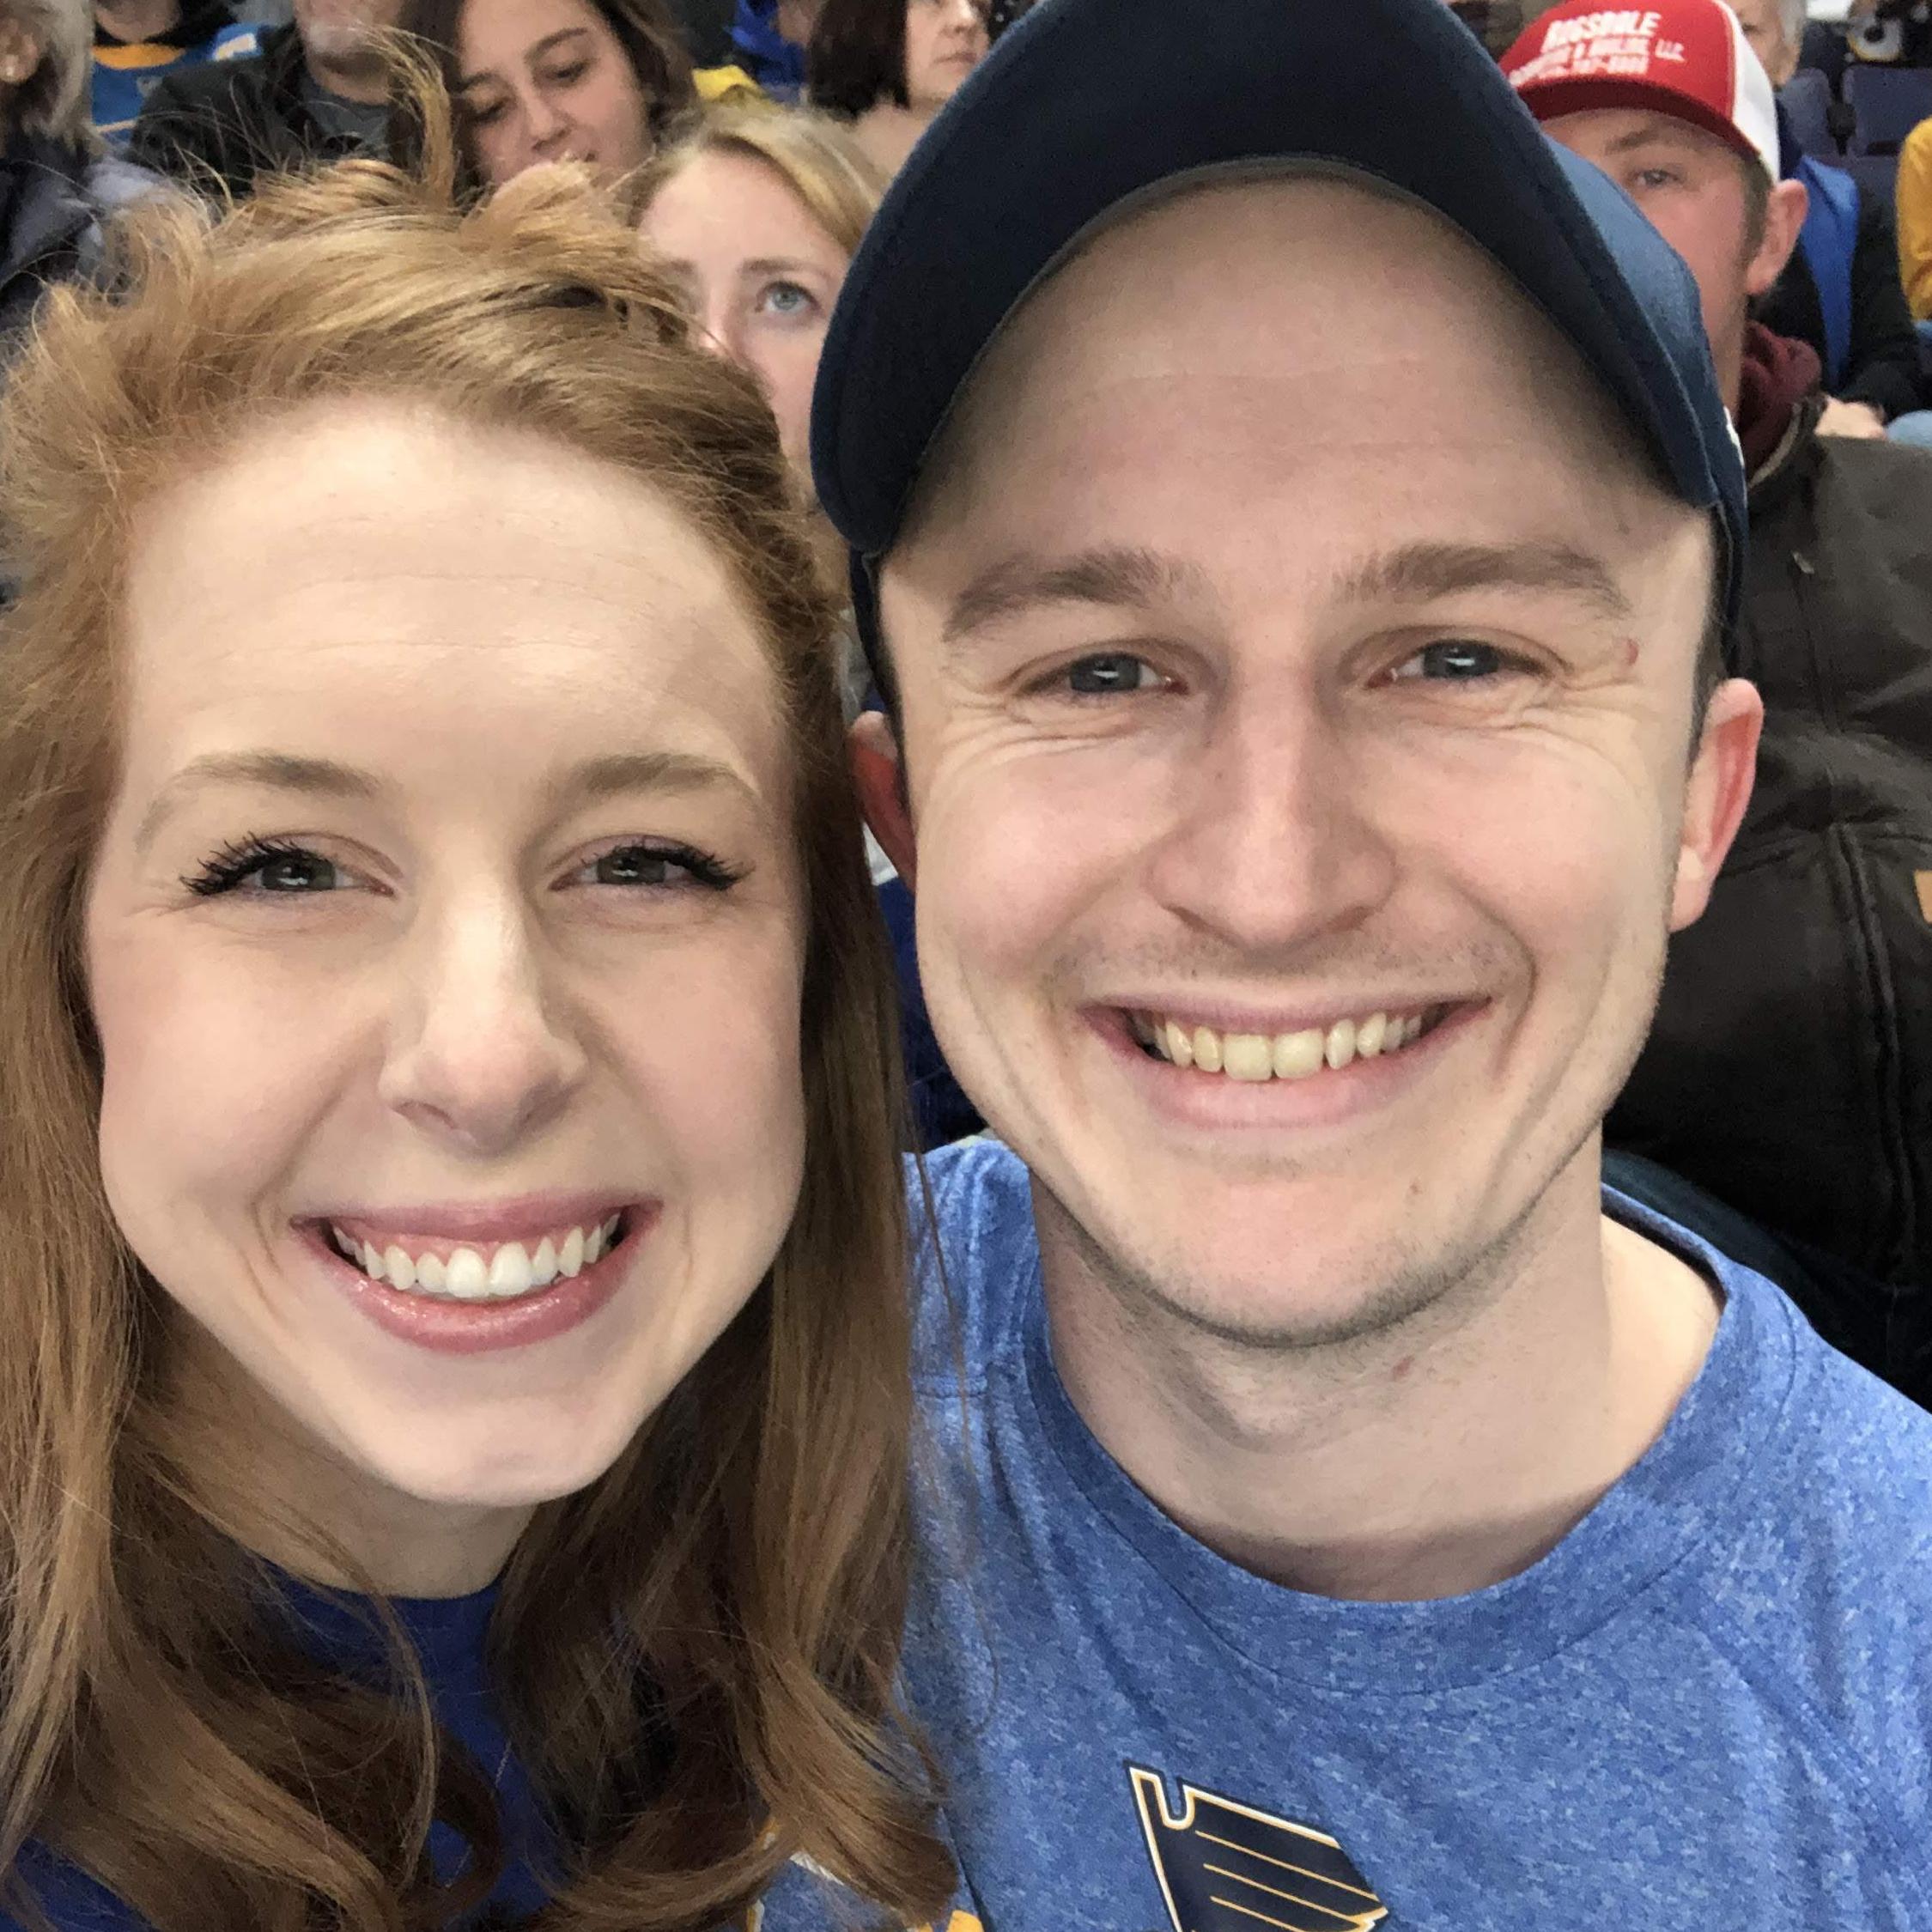 The day Chelsea became a fan of STL sports. Let's Go Blues!